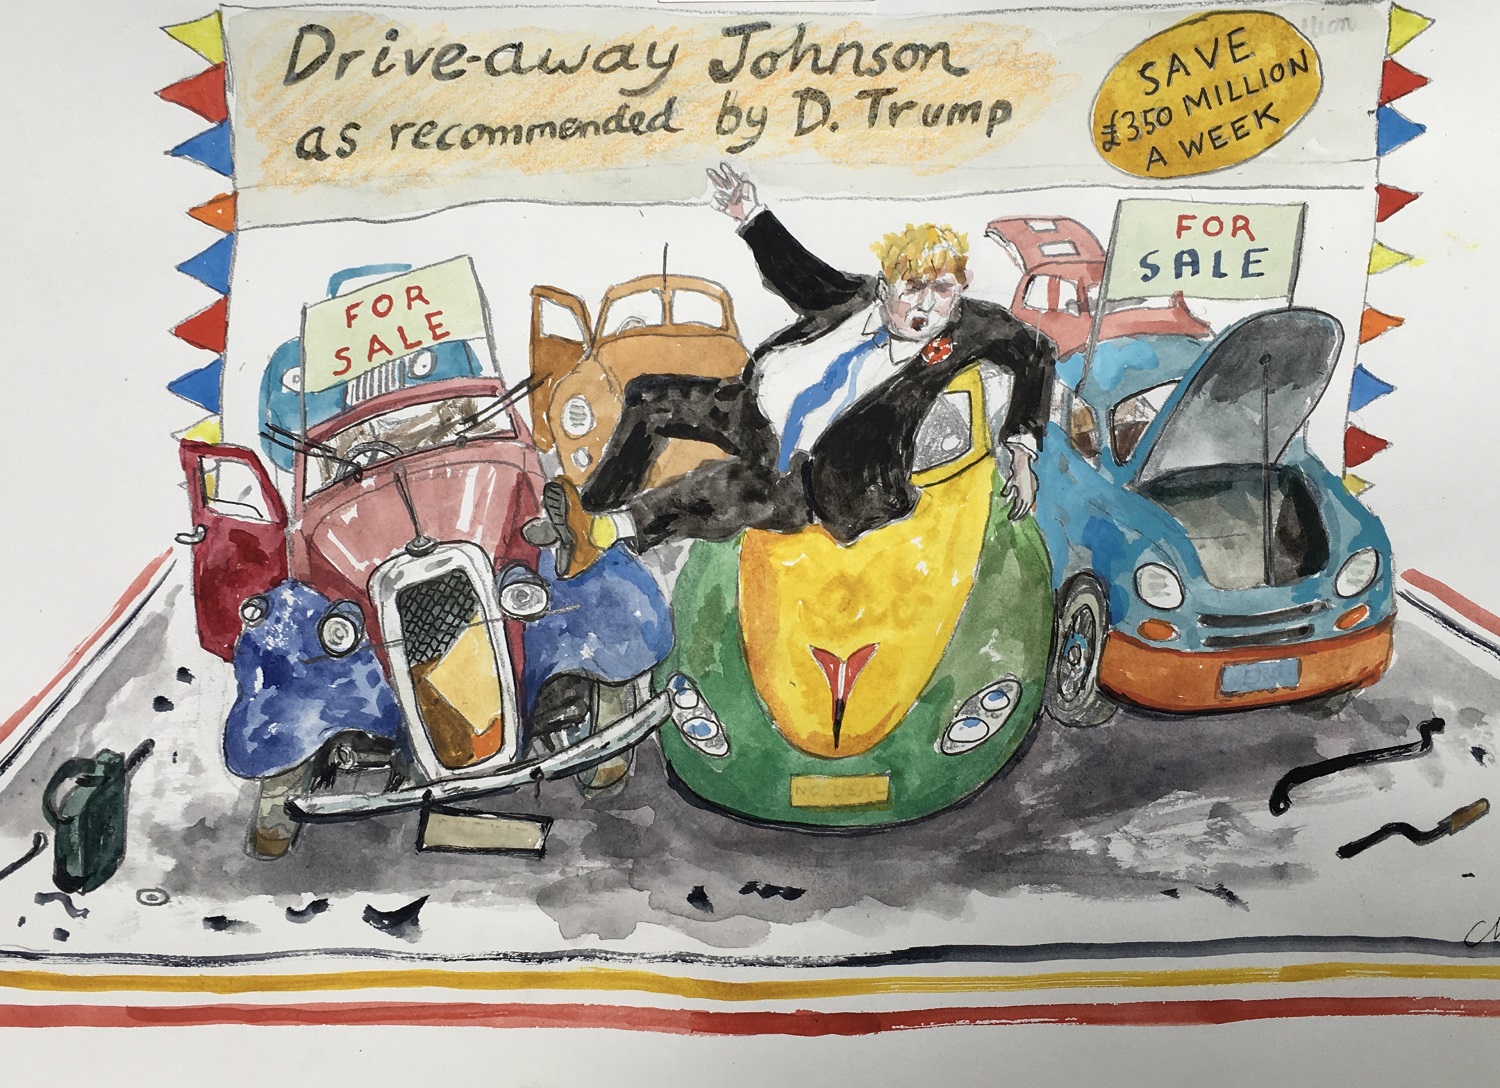 Driveaway Johnson… as recommended by D.Trump.